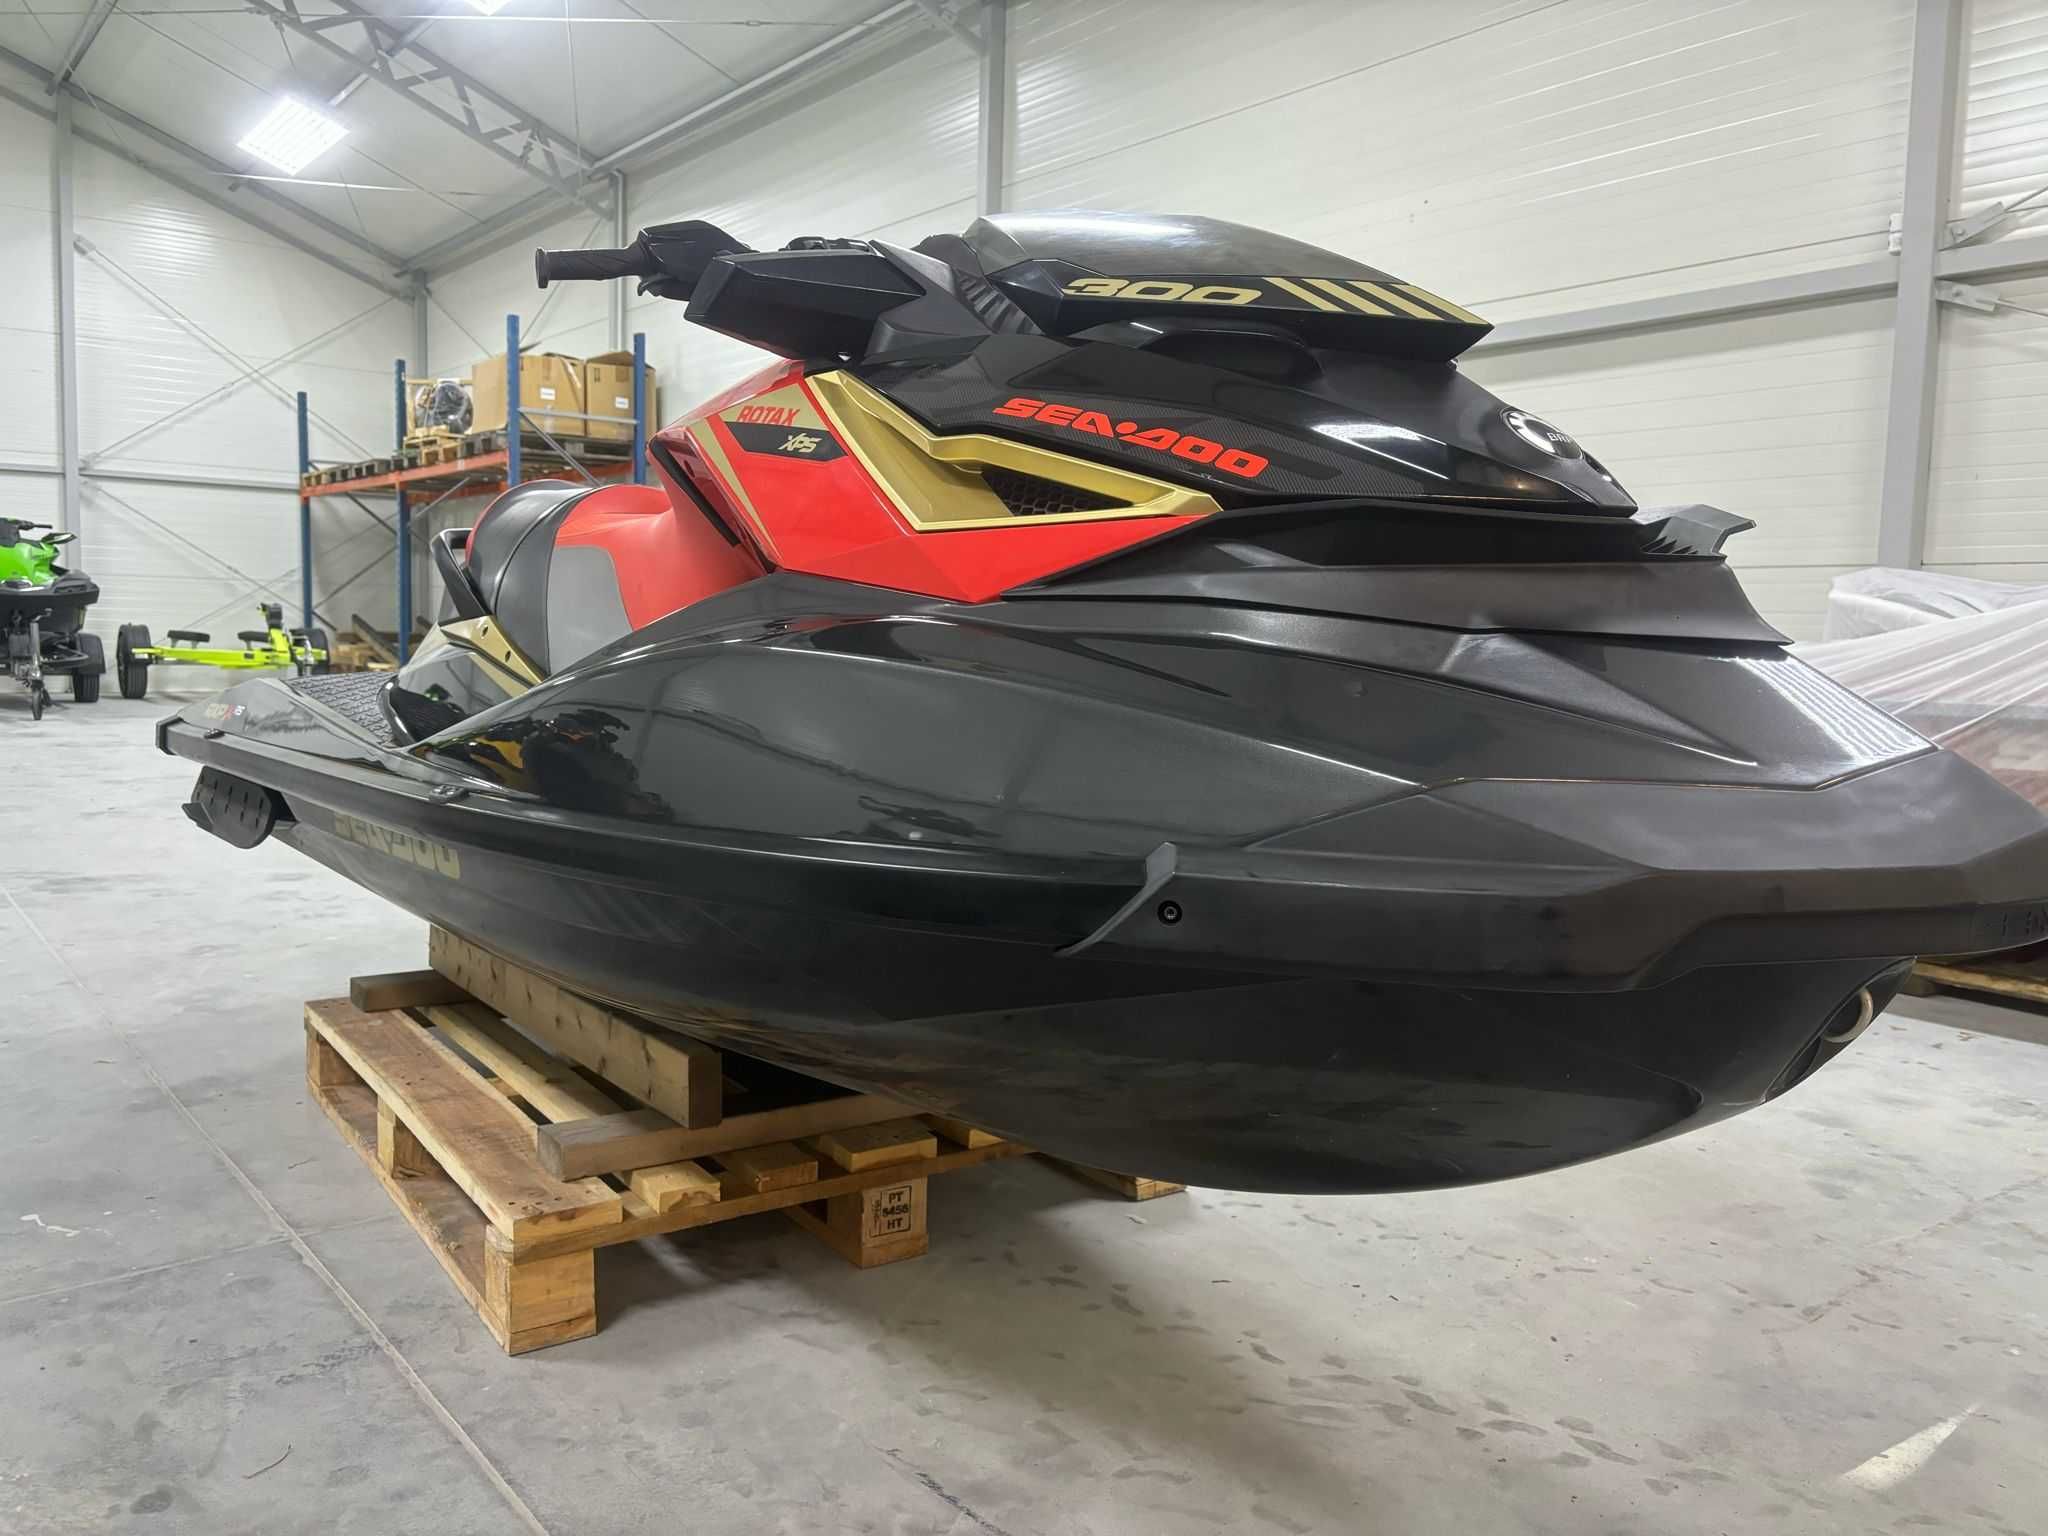 Sea Doo RXP 300 RS 2019r, 75mth, skuter wodny